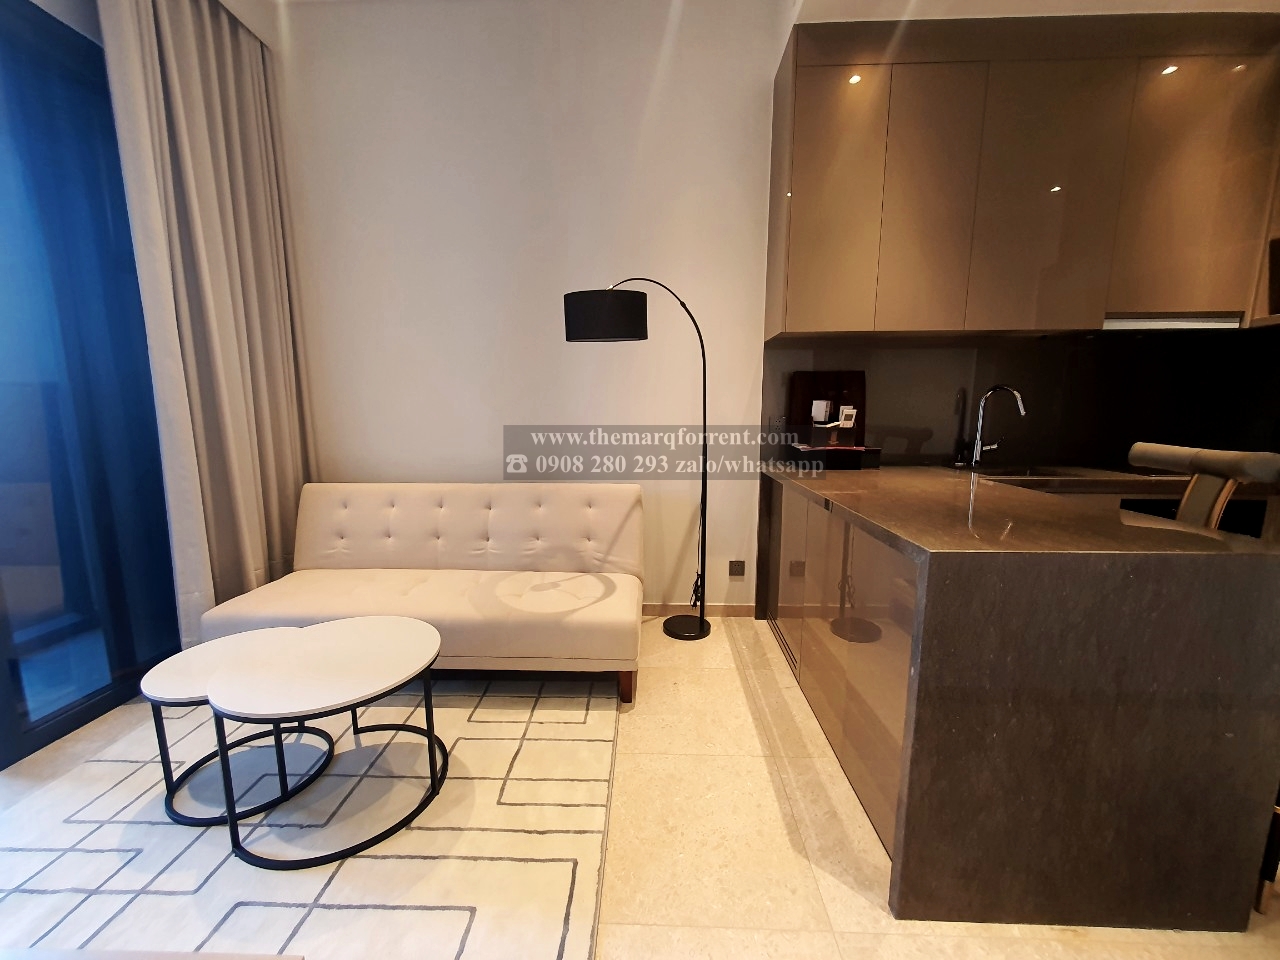 Nice 1br+1 apartment for rent in The Marq District 1